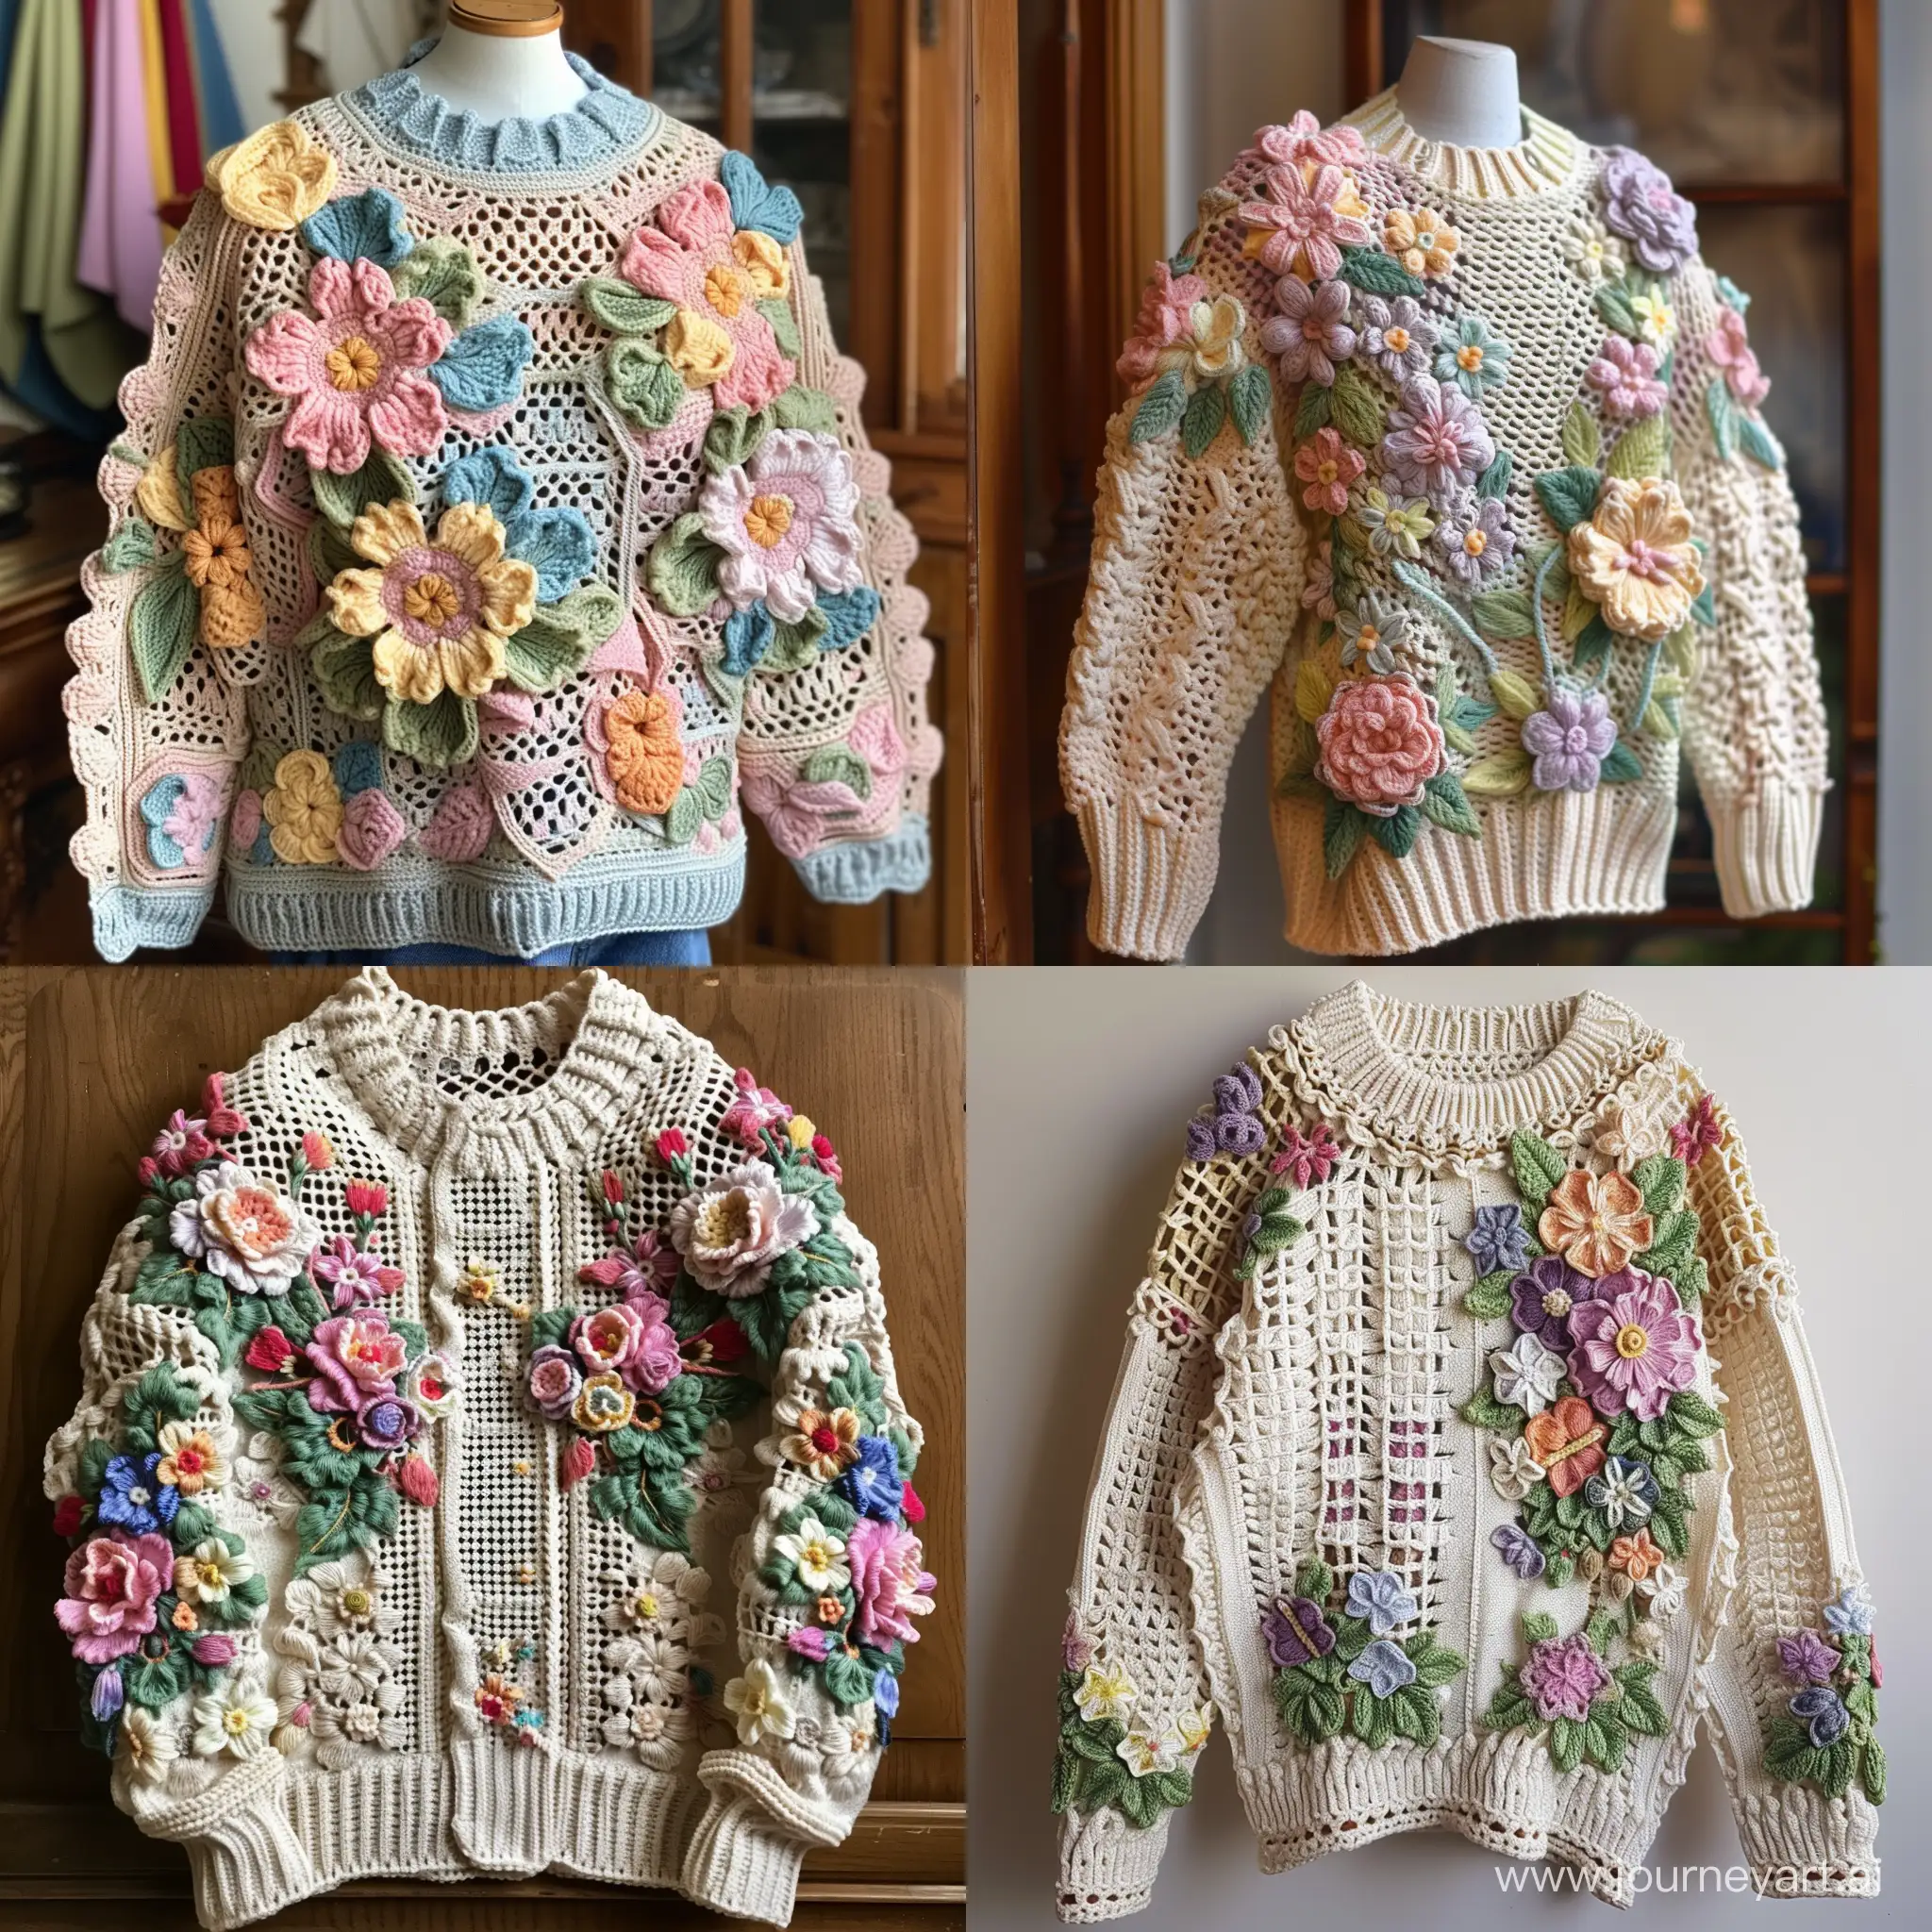 Crocheted pullover, Irish lace, floral motifs, intricate grids, delicate pastel colors